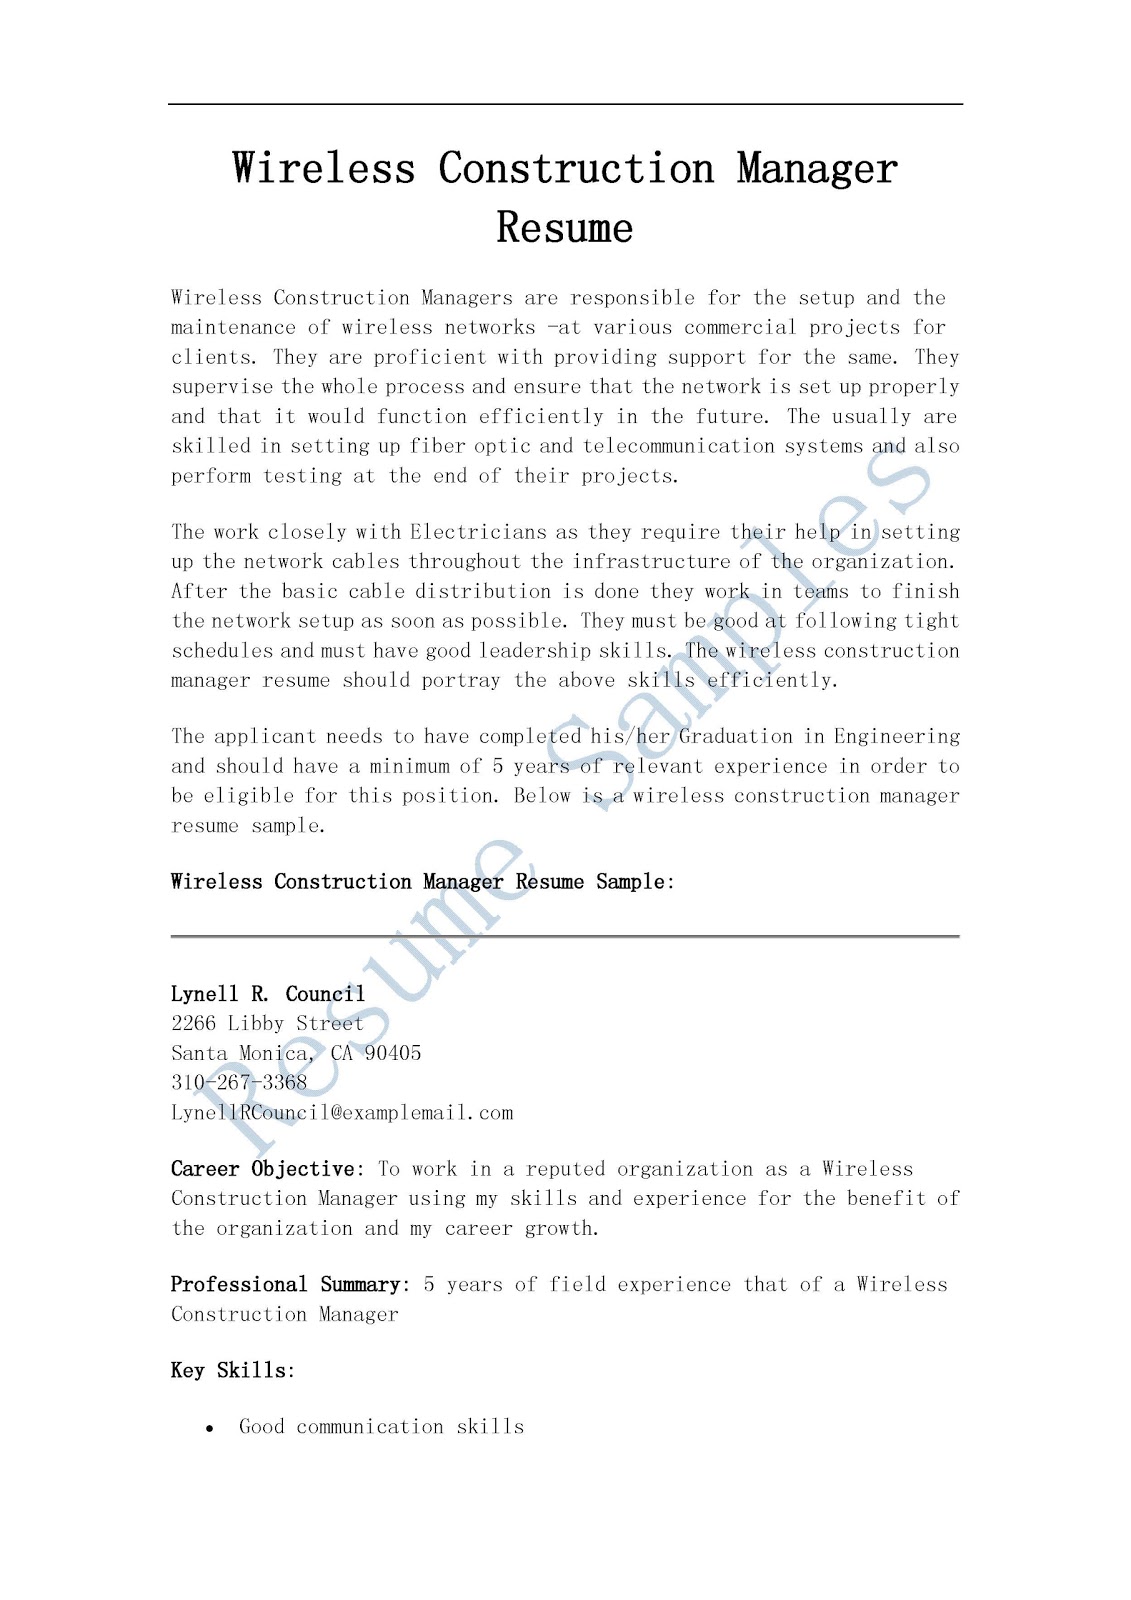 resume samples wireless construction manager resume